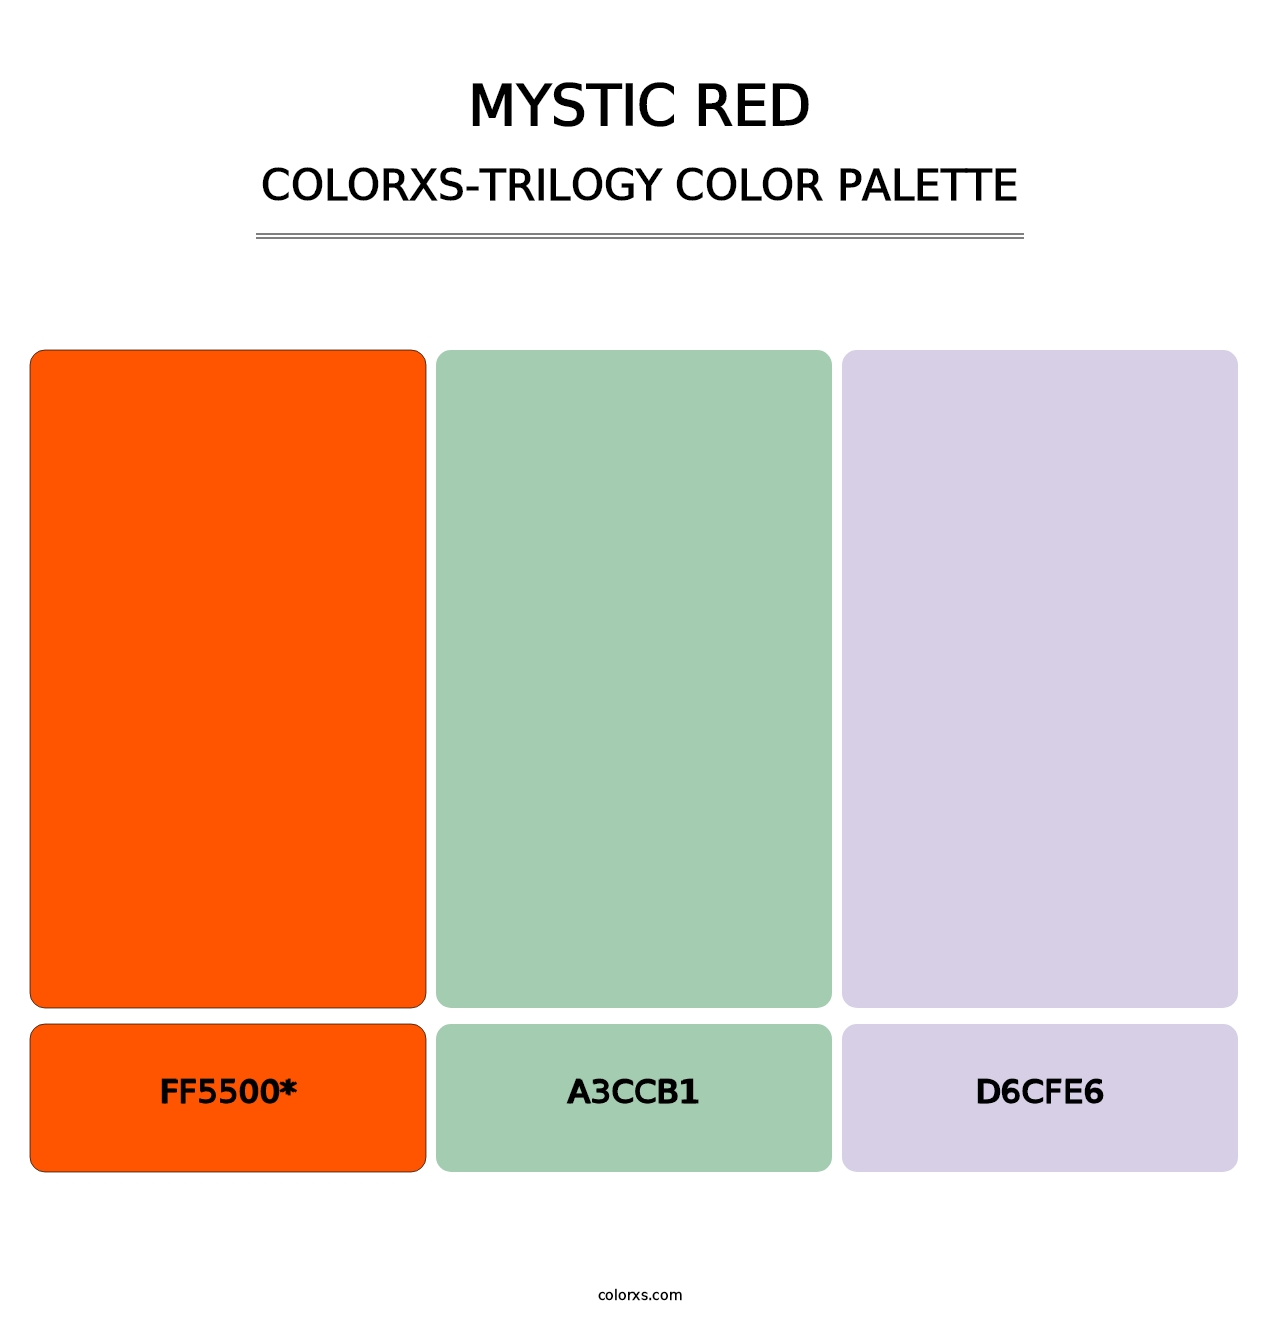 Mystic Red - Colorxs Trilogy Palette